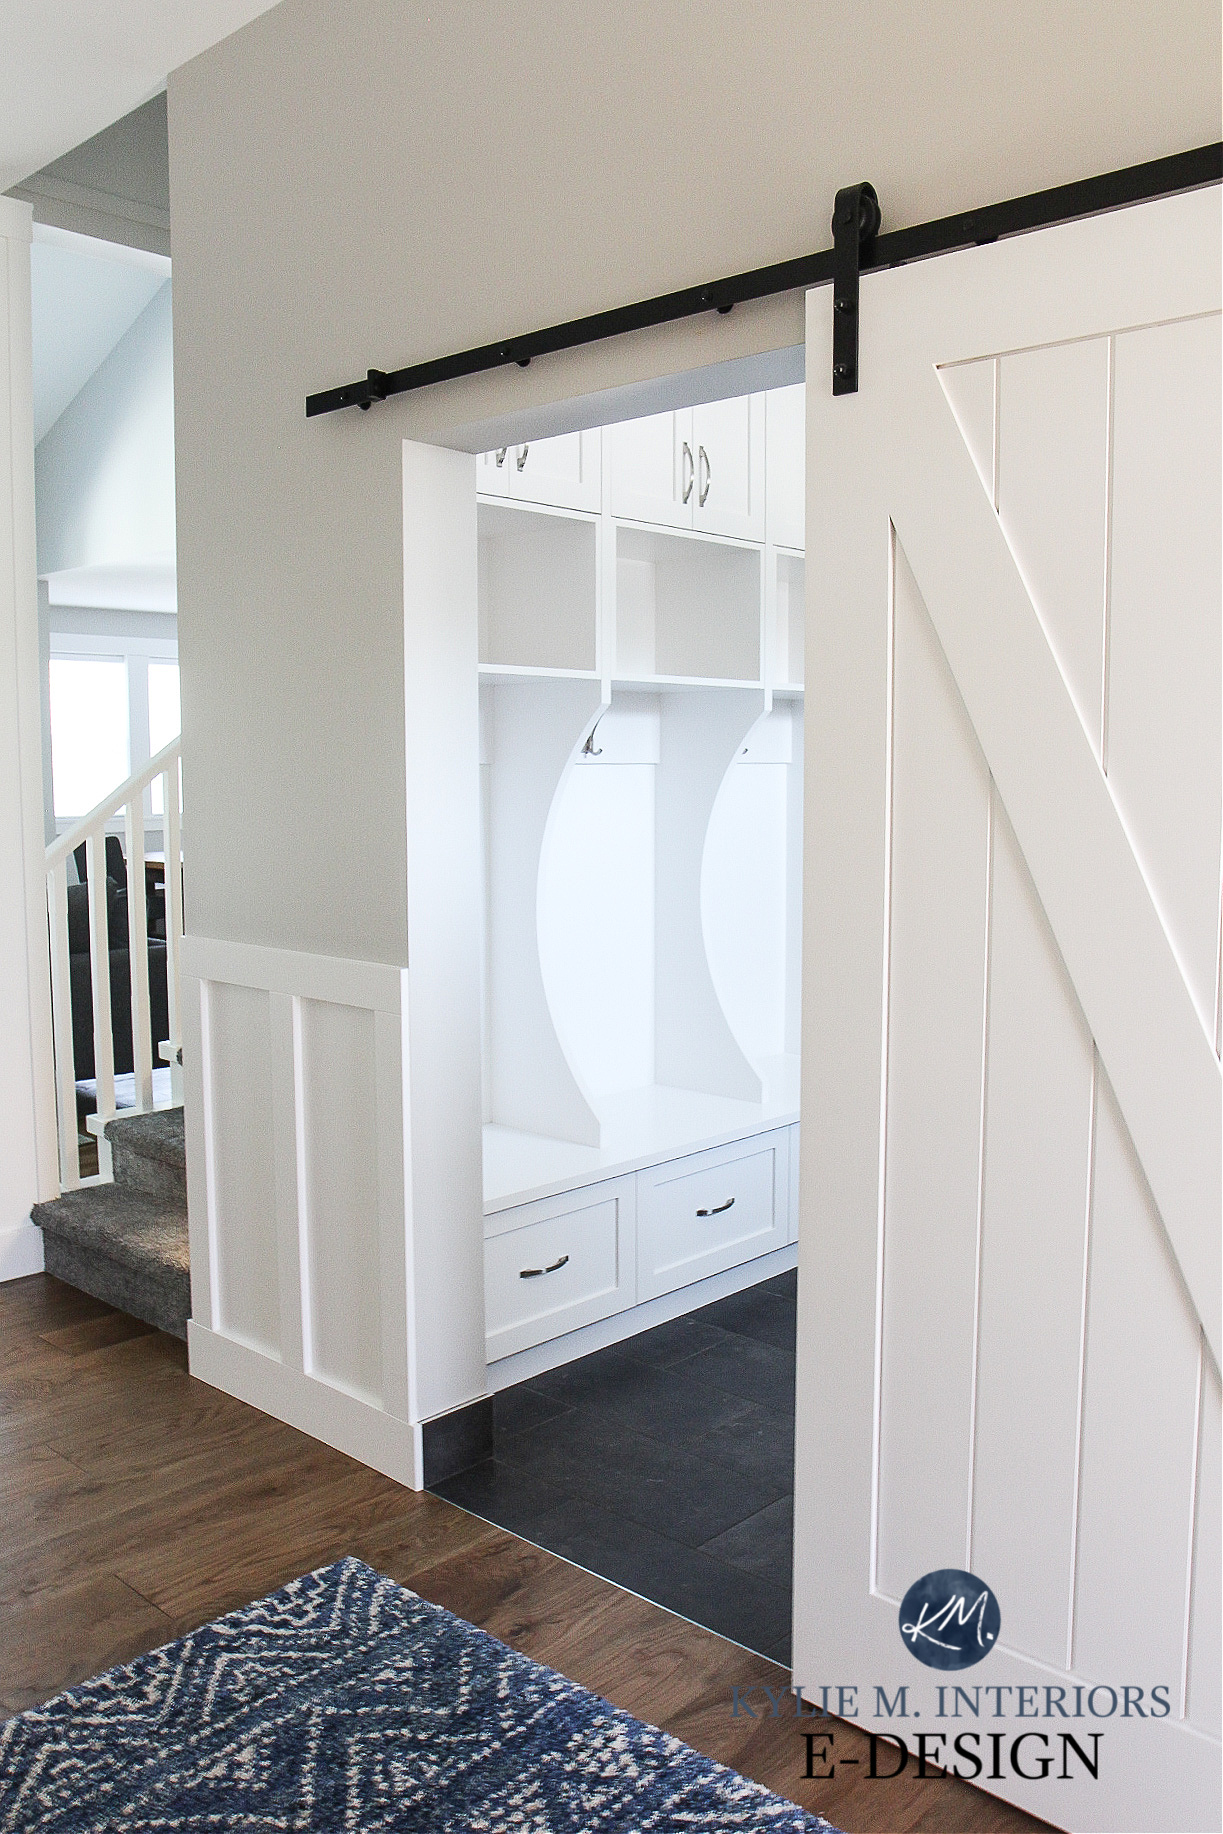 Sliding barn doo into laundry room mud room with built in bench, white wainscoting, Benjamin Moore Stonington Gray and Sherwin High Reflective White. Kylie M Interiors Edesign, diy upate ideas.